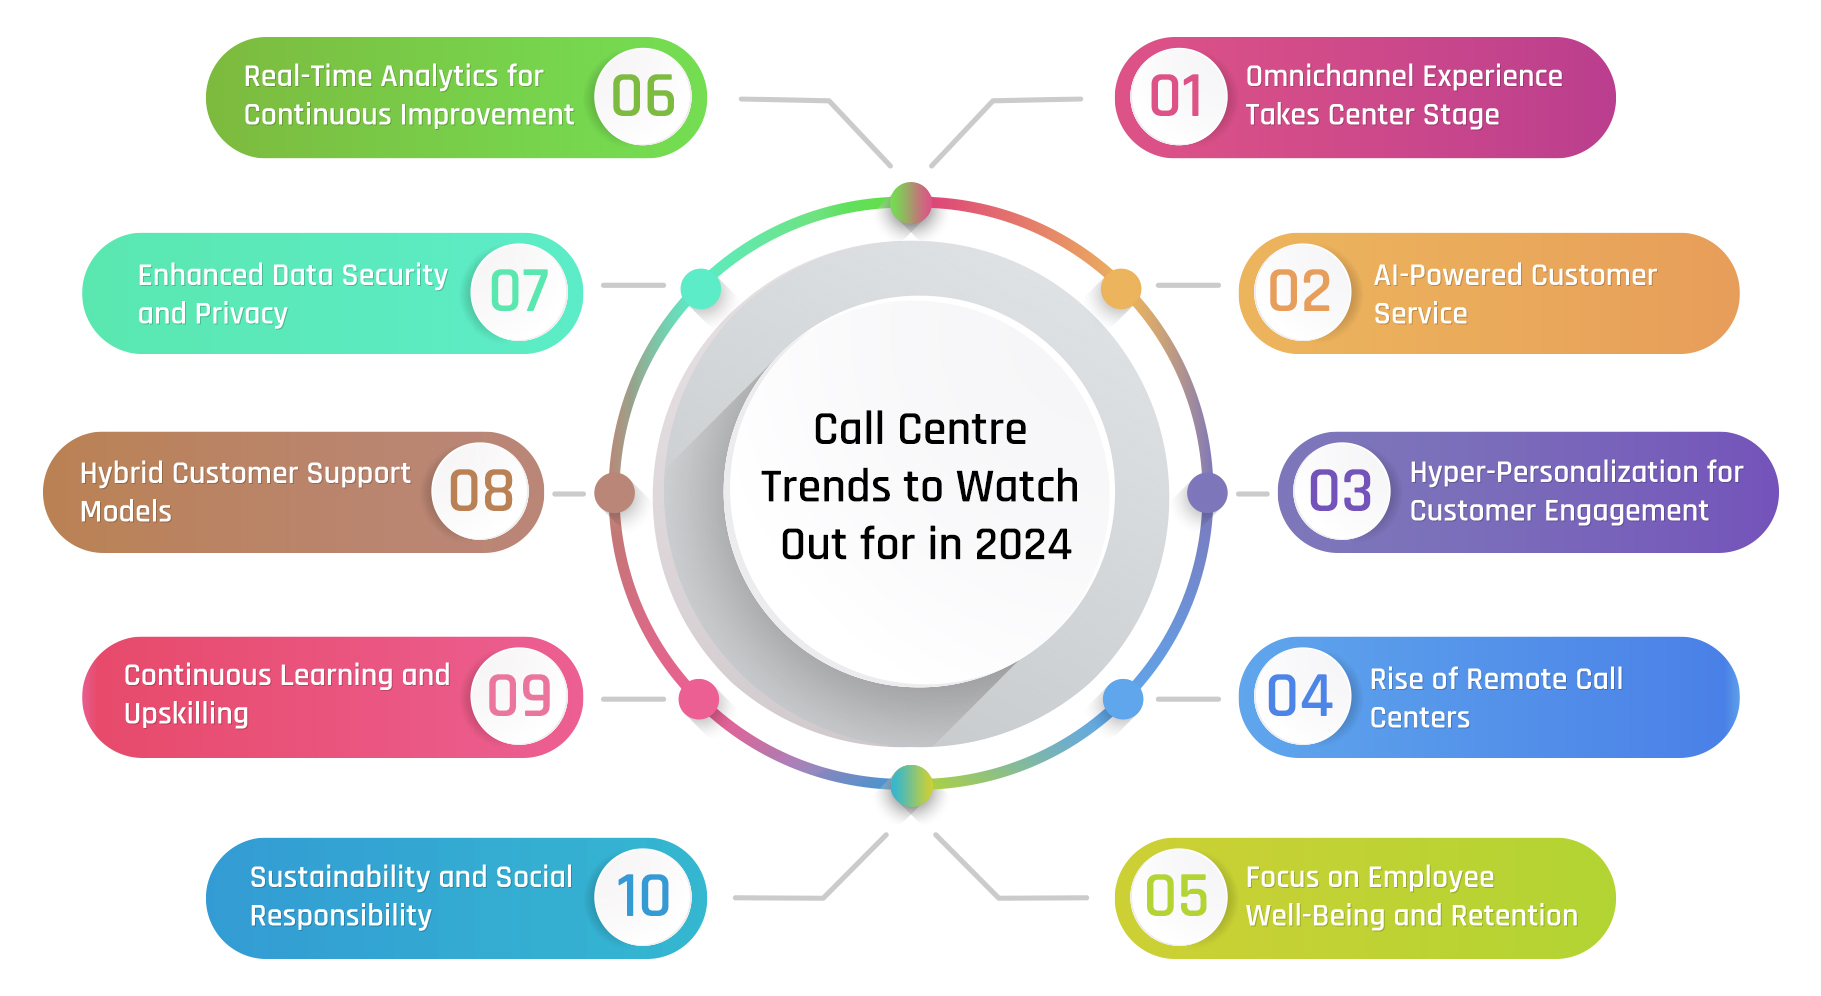 Call Centre Trends to Watch Out for in 2024